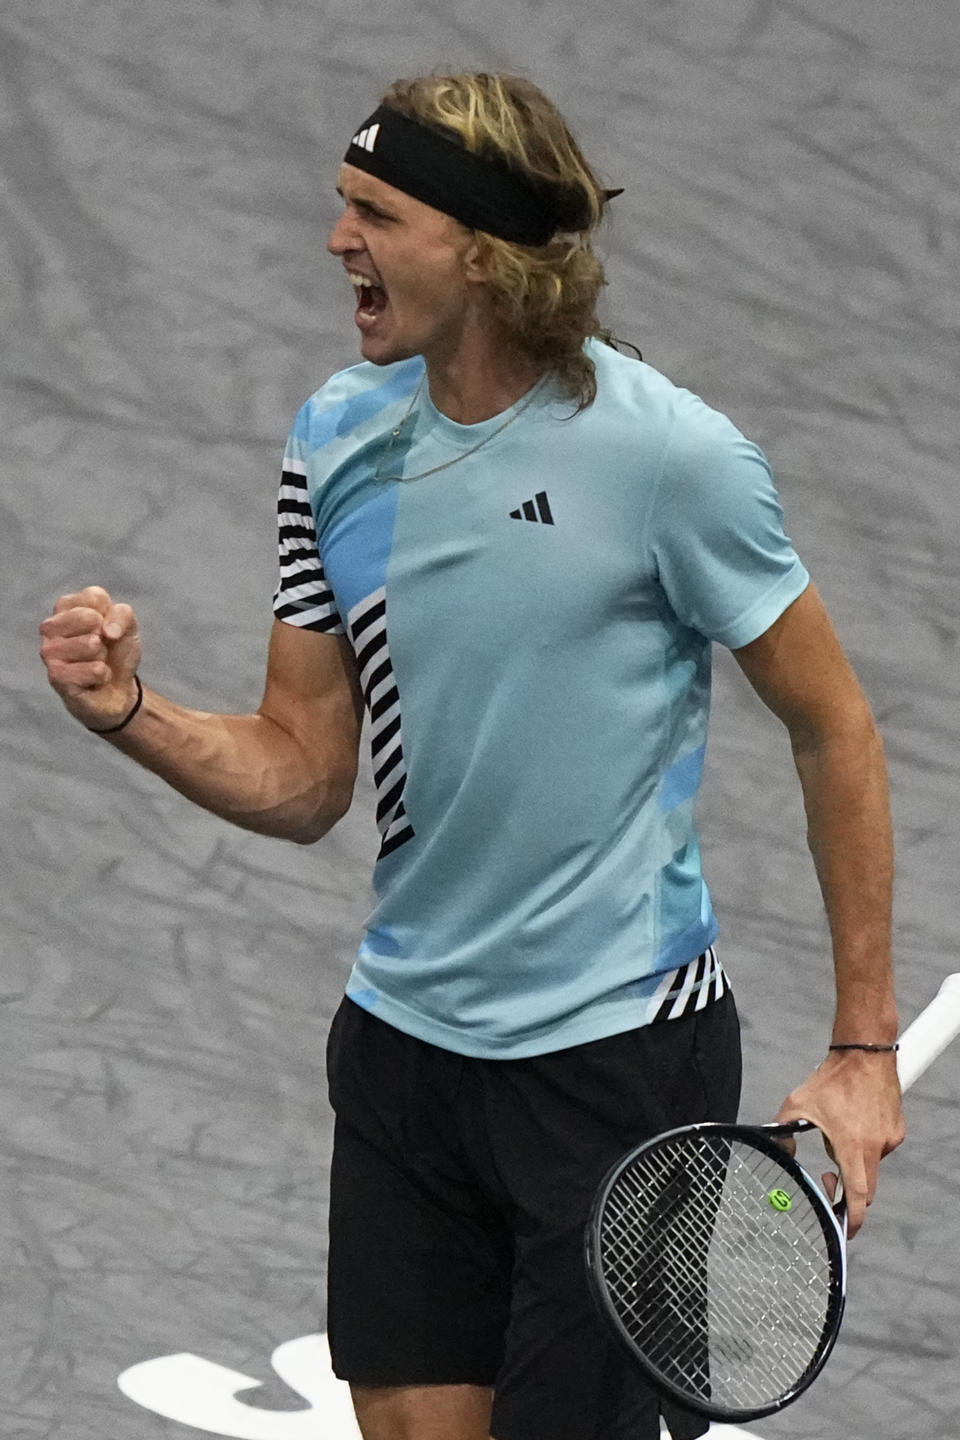 Germany's Alexander Zverev celebrates winning a point as he plays Greece's Stefanos Tsitsipas during their third round match of the Paris Masters tennis tournament, at the Accor Arena, Thursday Nov. 2, 2023 in Paris. (AP Photo/Michel Euler)